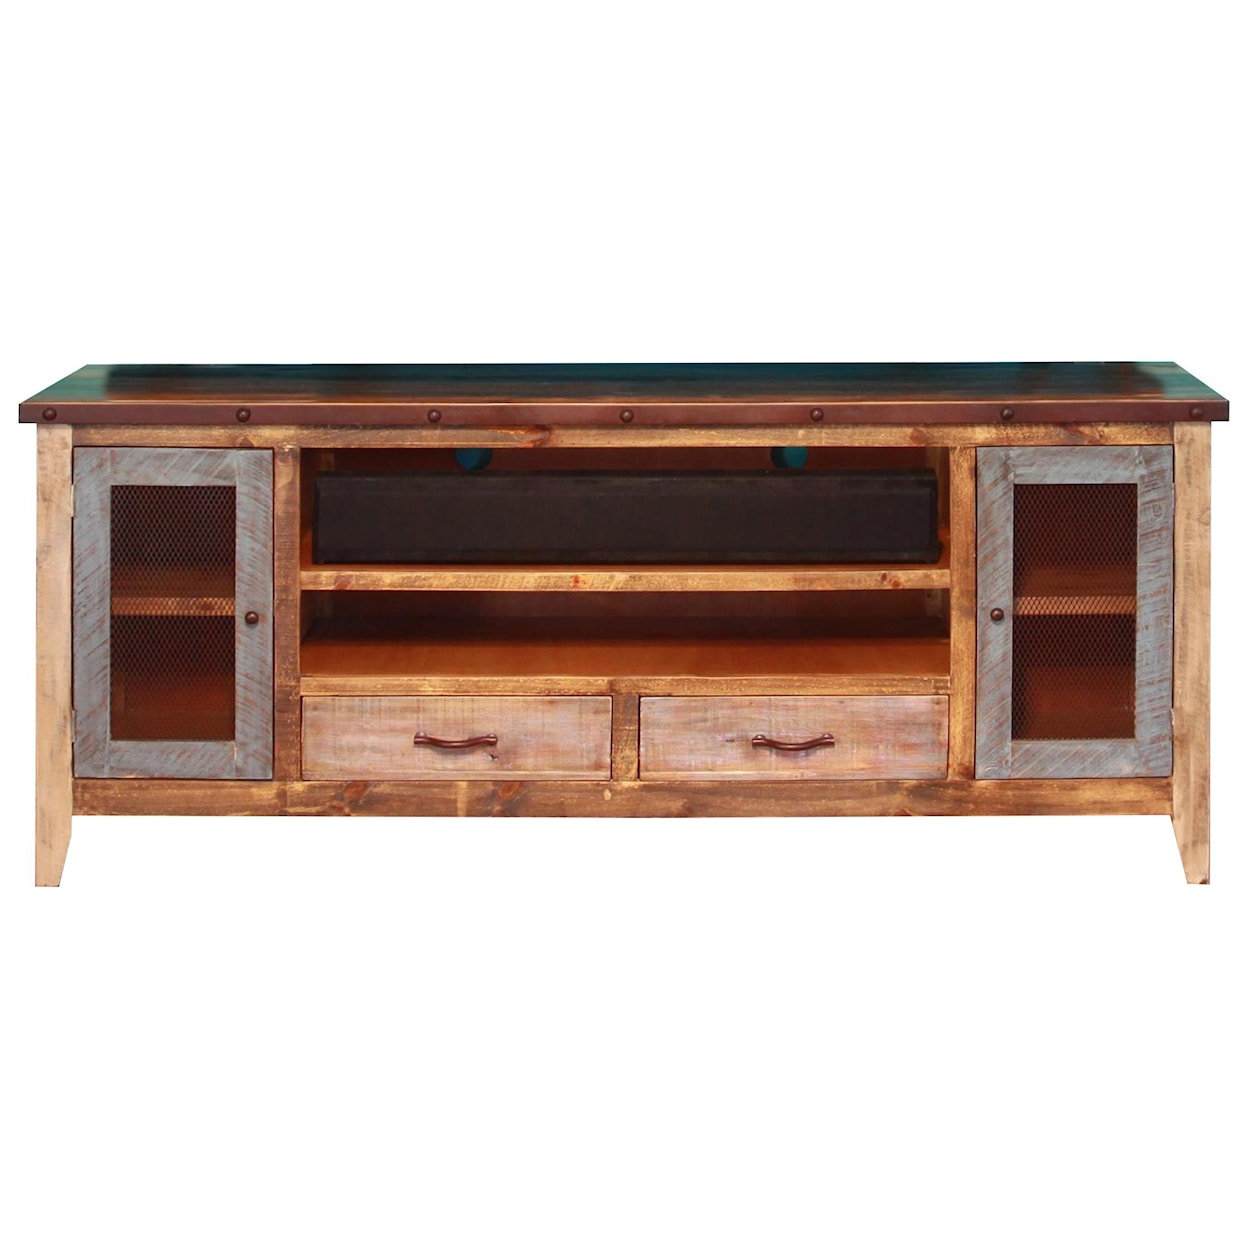 International Furniture Direct 900 Antique Solid Pine 76" TV Stand